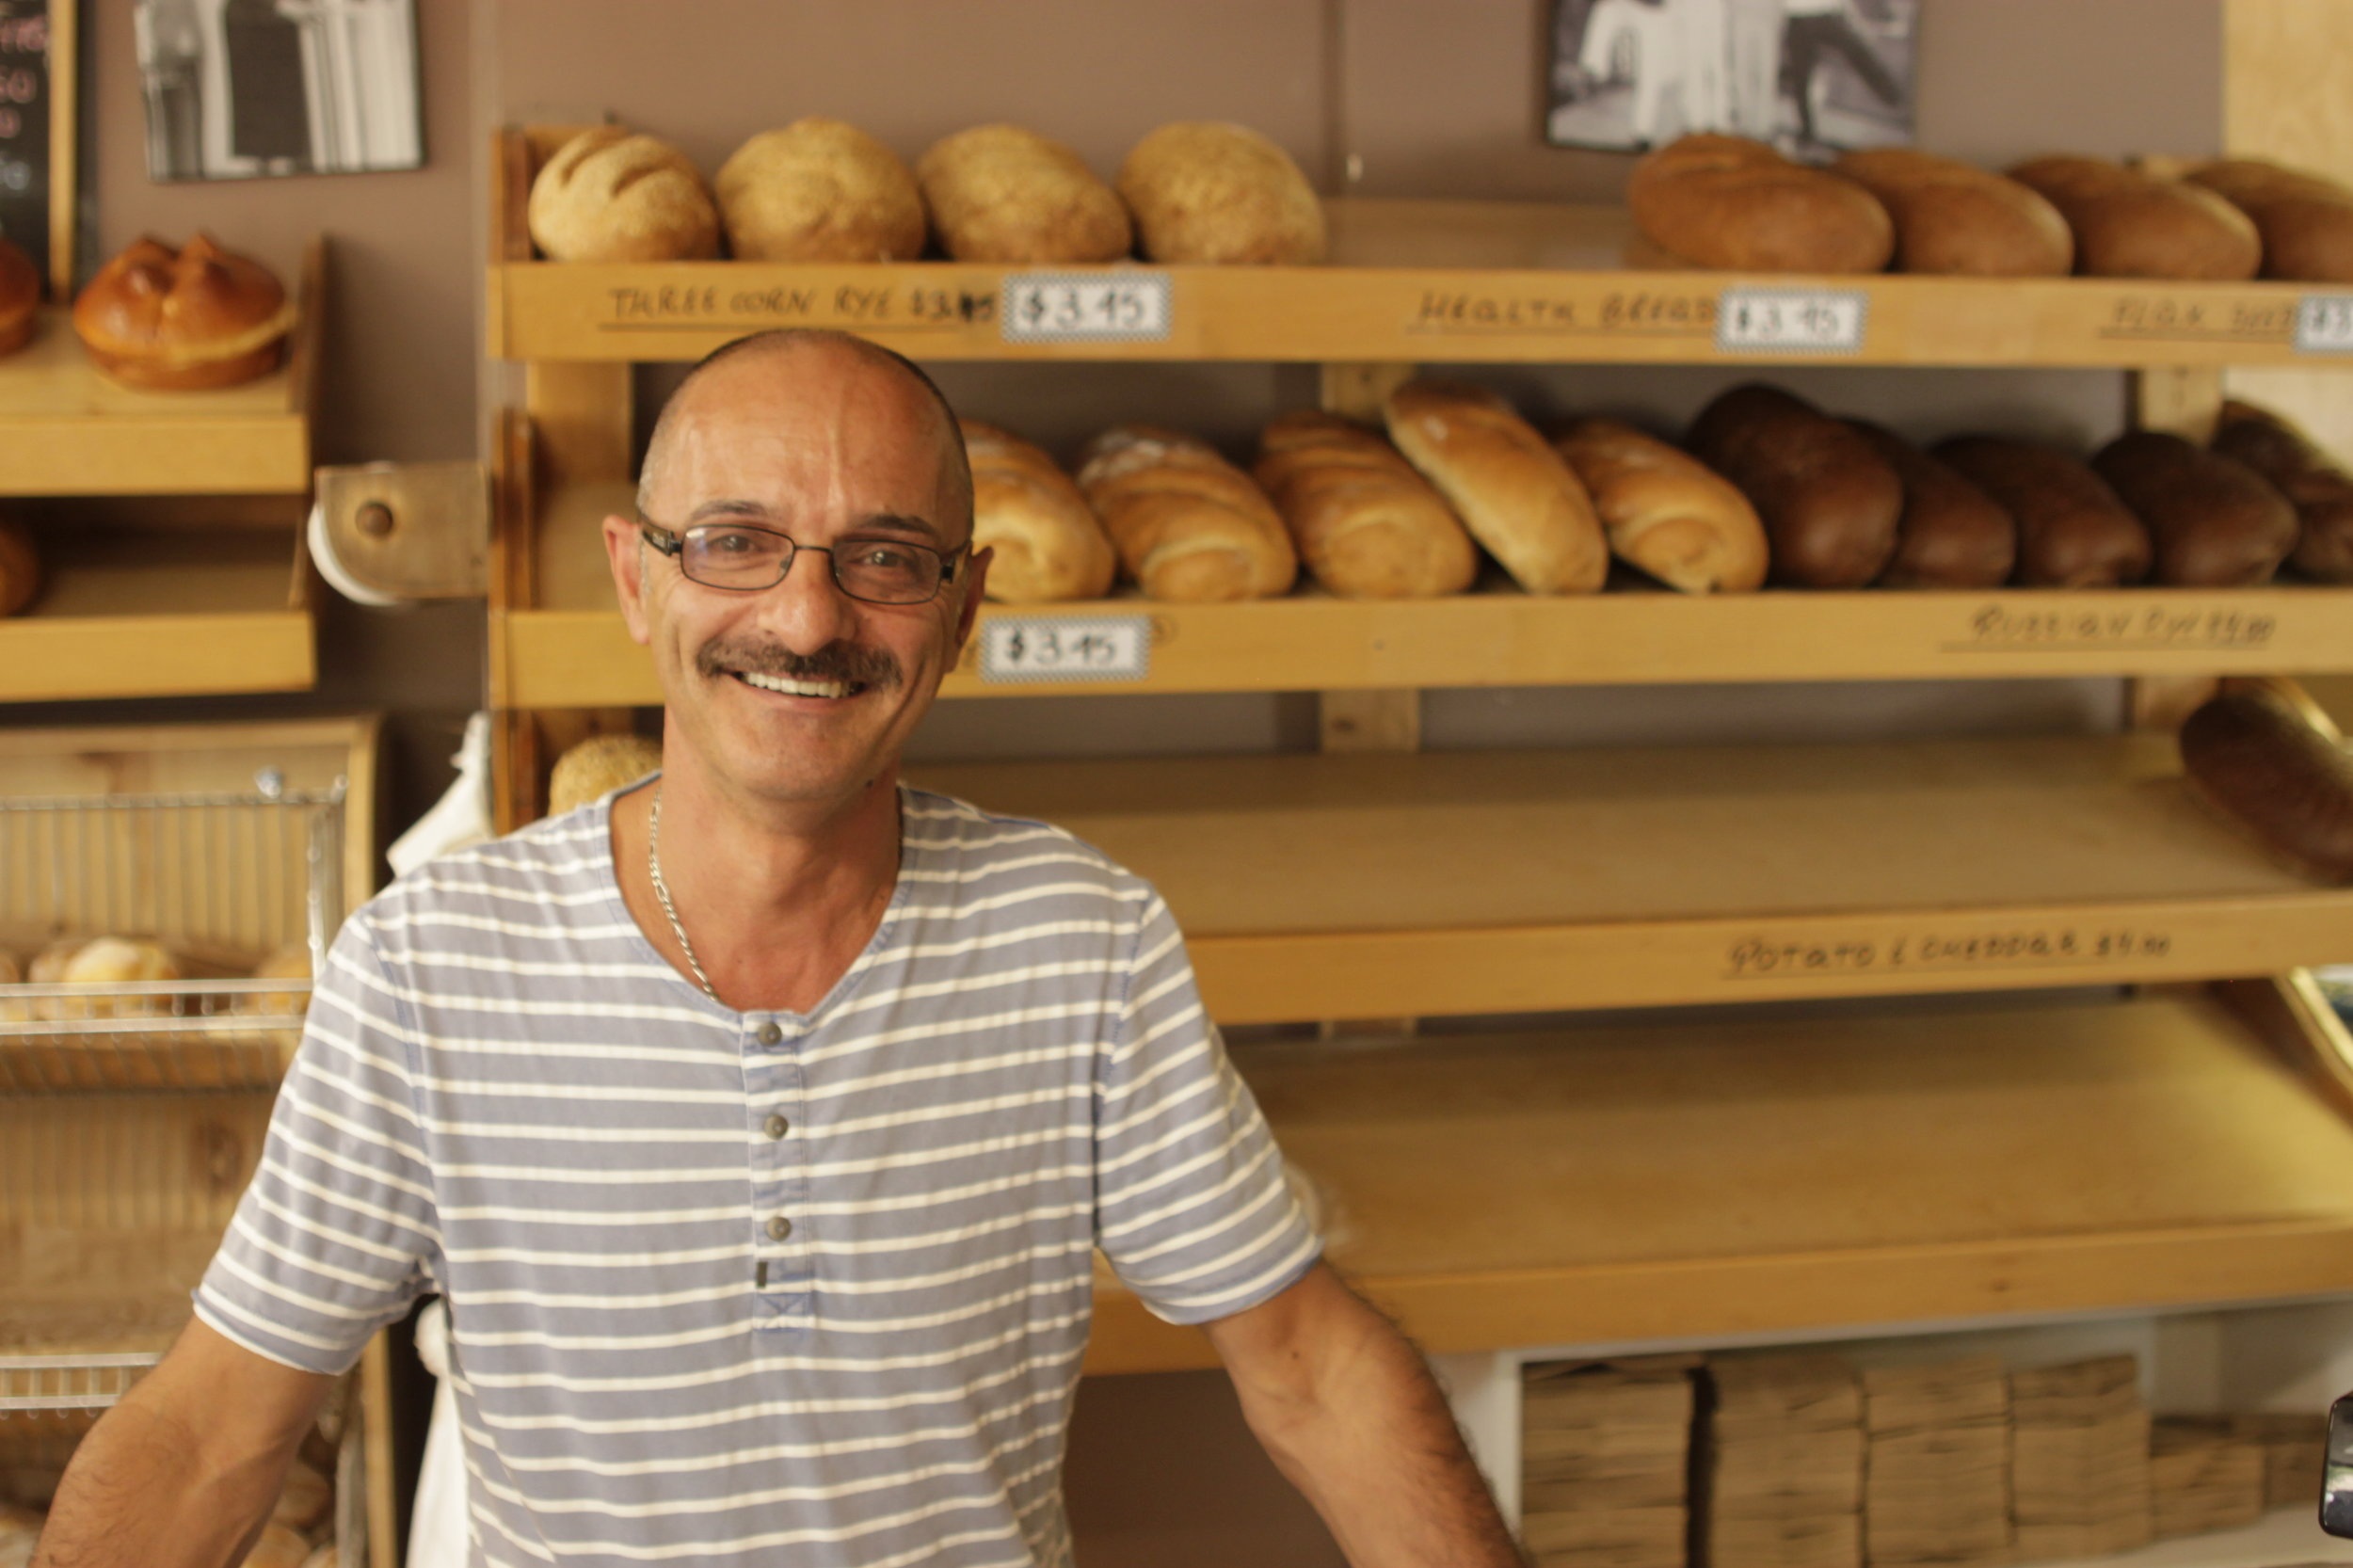  The campaign was not only about highlighting the food of Alberta Avenue but the faces also; the people who make the avenue so vibrant. We went to each business and captured the owner in their business for the marketing campaign. This is Frank or Fra